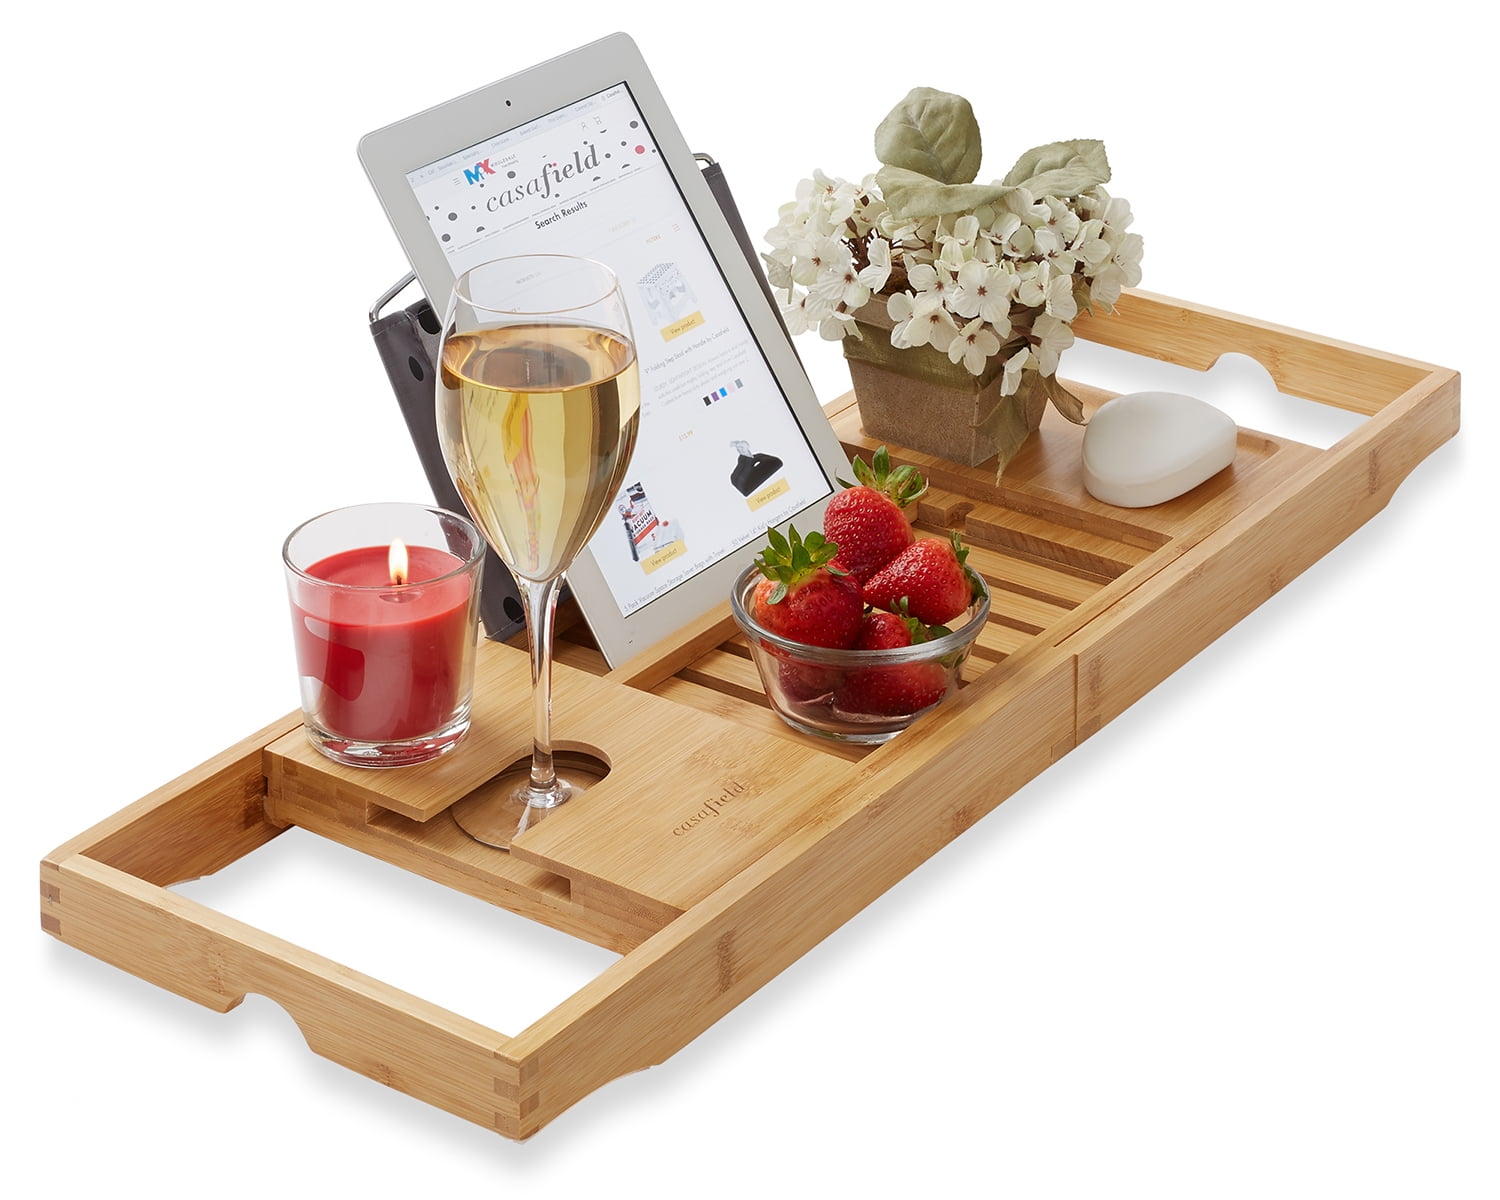 Candle//Glass Holder Phone Holder and Wine Glass slots Extendable Table Luxury Bamboo Bath Tray Wooden Bathtub Caddy and Breakfast Tray with Ipad//Tablet Holder Perfect Bathroom Accessories CORAZON HOME .